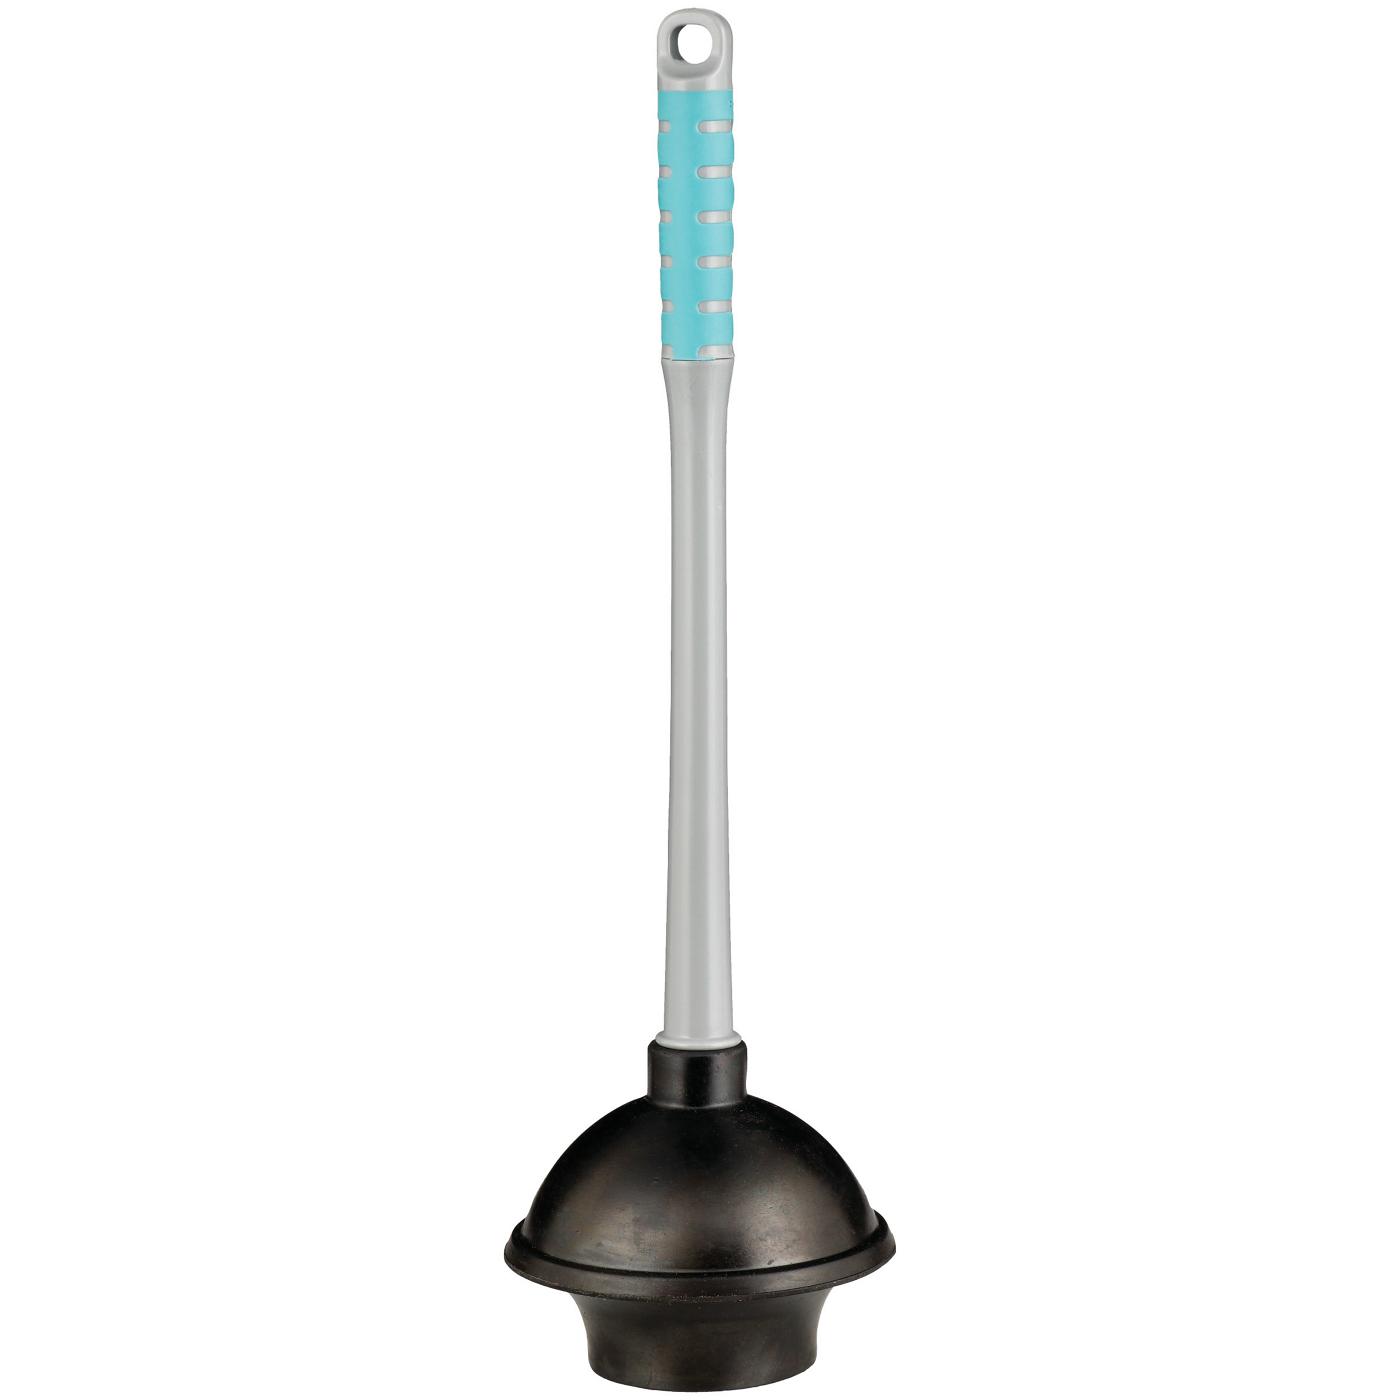 H-E-B Plunger; image 1 of 2